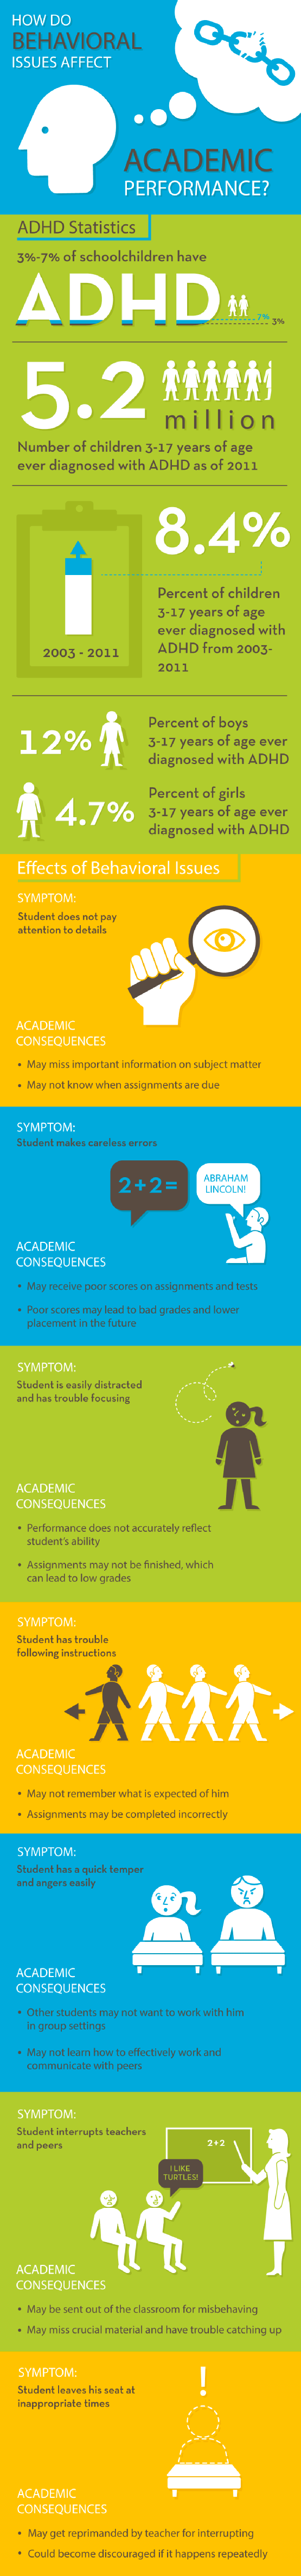 How Behavioral Issues Affect Academic Performance Infographic